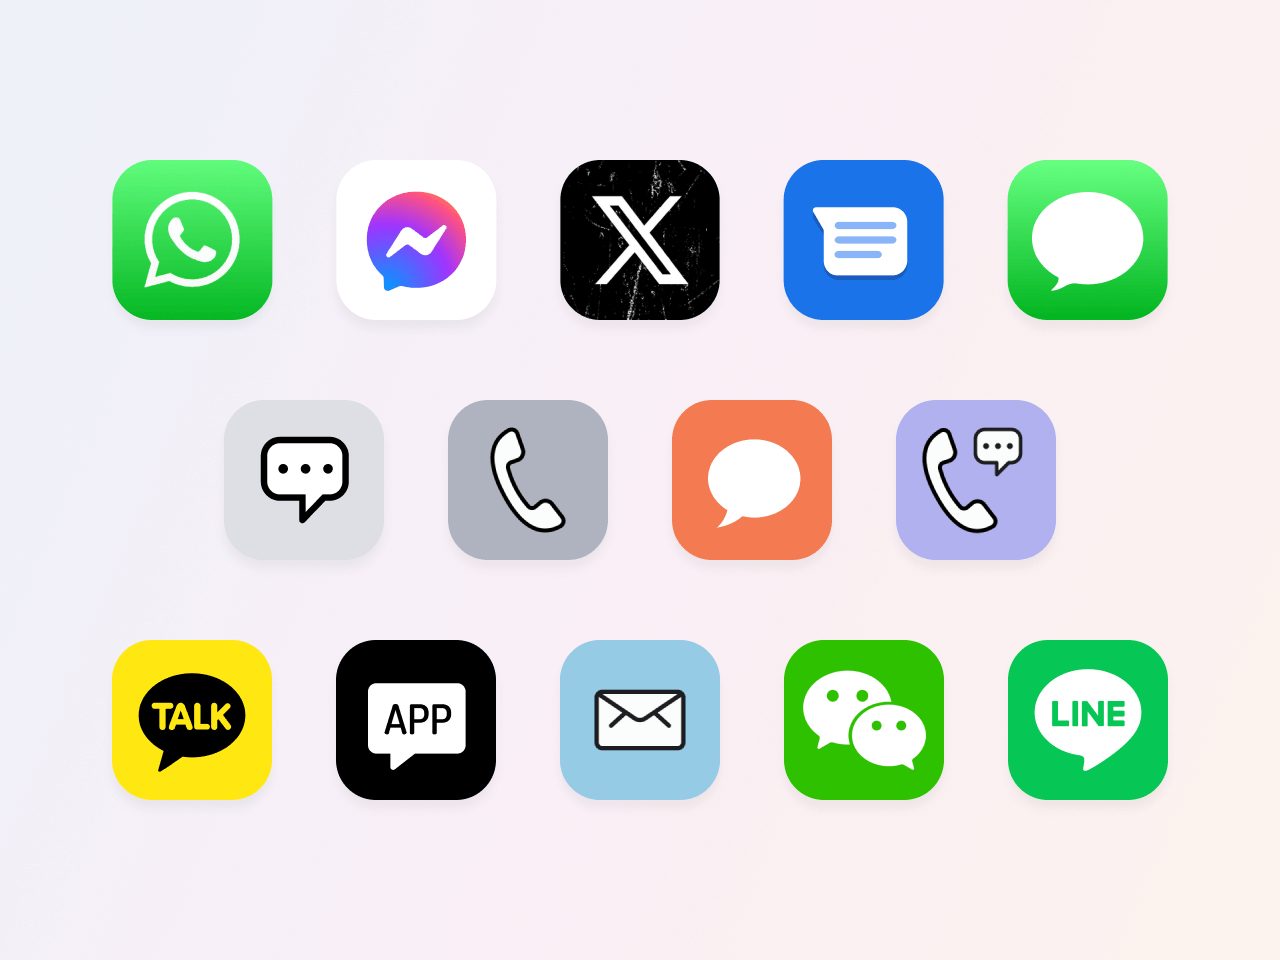 Icons symbolizing the messaging channels and favorite messaging apps that LivePerson's omnichannel messaging platform supports